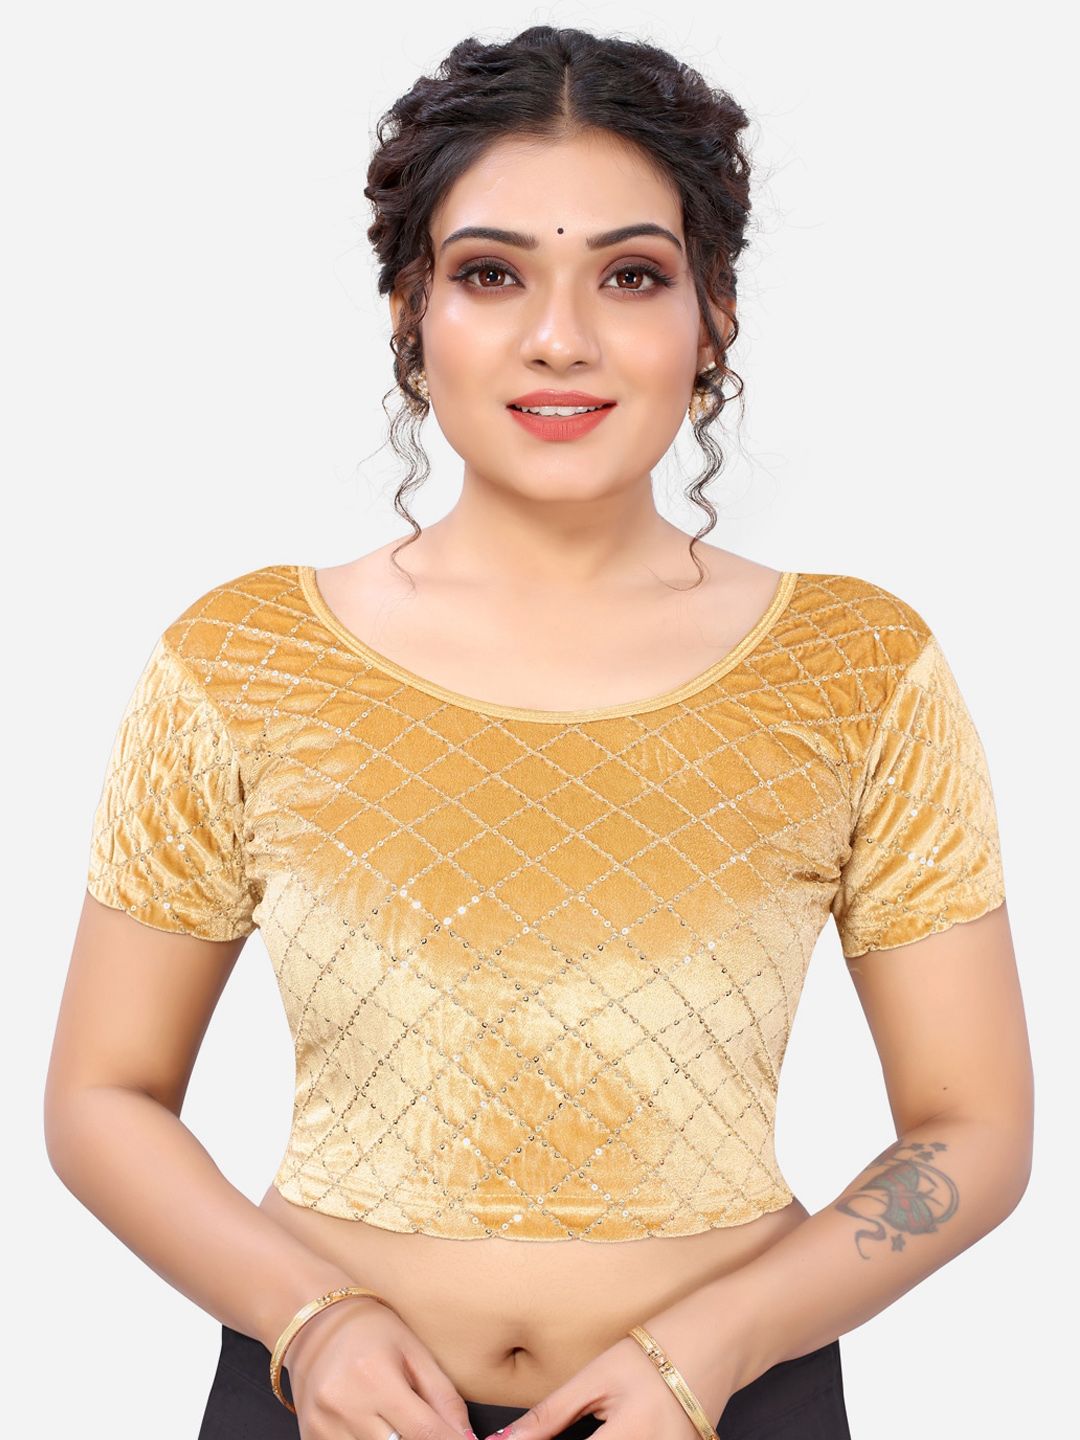 SIRIL Women Beige Embellished Saree Blouse Price in India